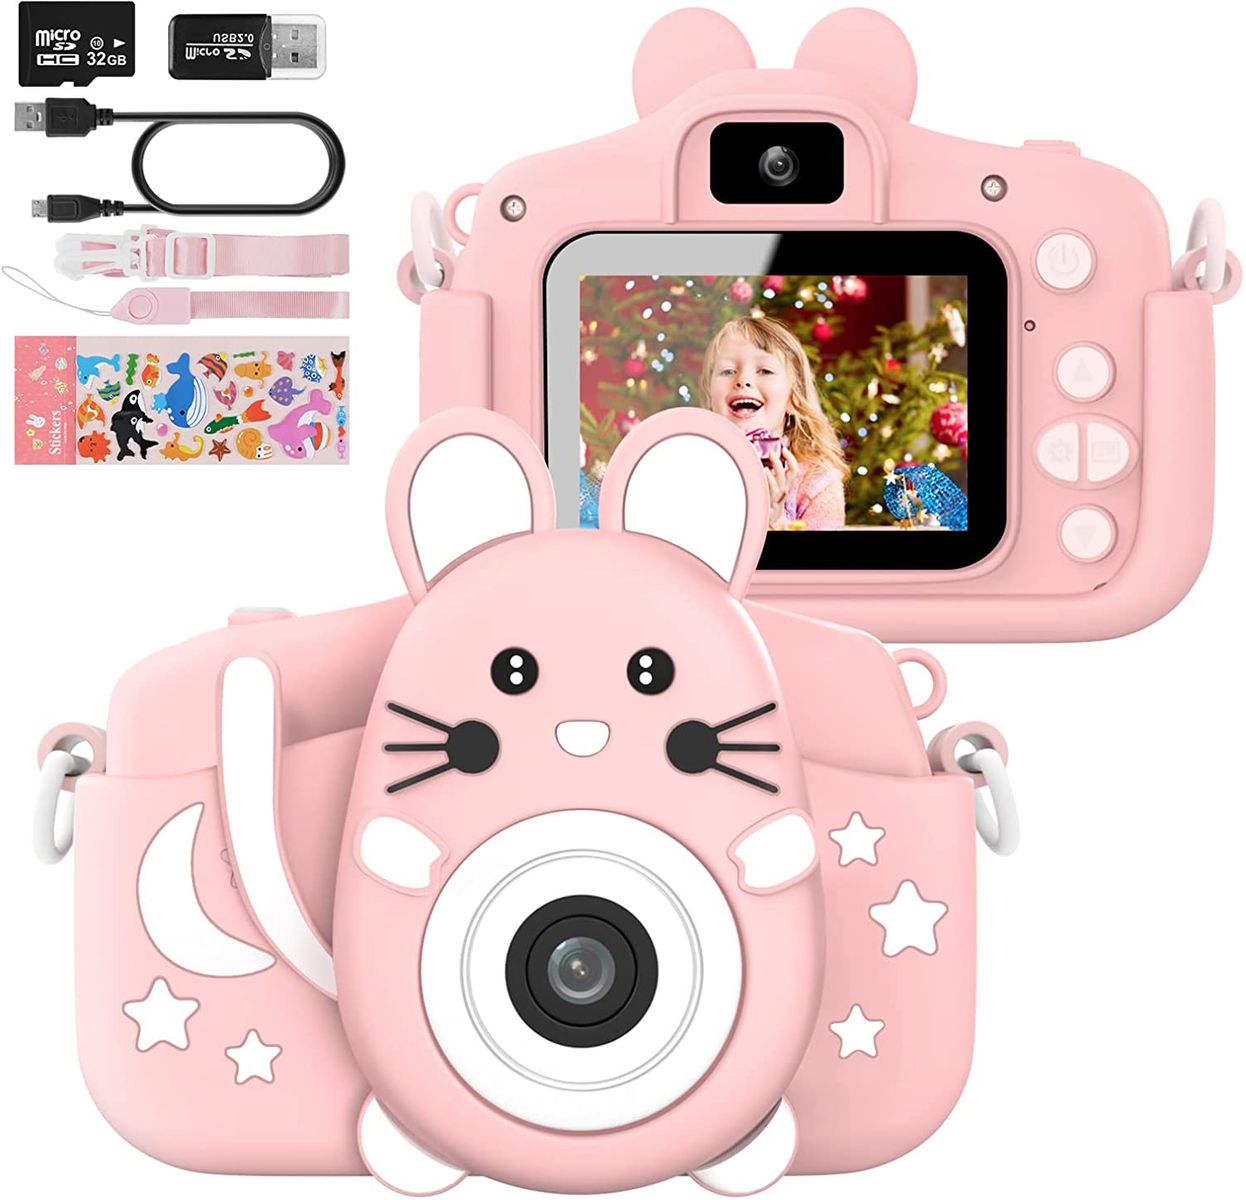 Hangrui Kids Camera with Silicone Case, 20.0MP Rechargeable Kids Digital Dual Camera with 2.0 Inch IPS Screen 1080P Video Camcorder, 32GB SD Card, Selfie Childrens Camera Toy for Boys & Girls Age 3-12, Pink A-Pink